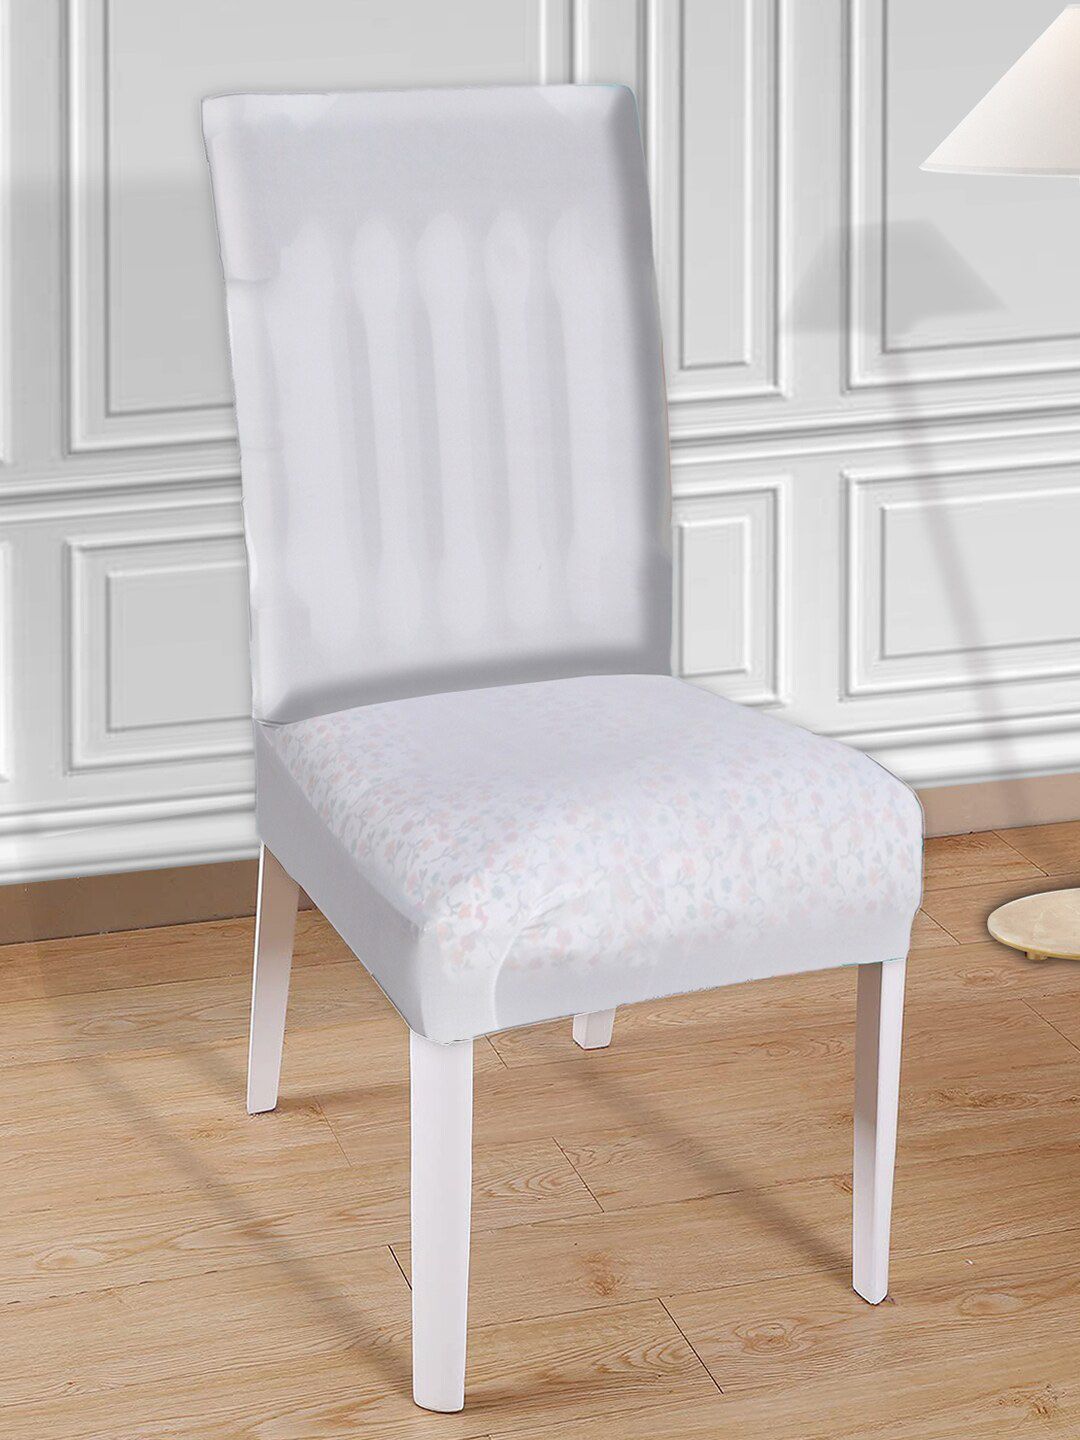 Kuber Industries Set of 2 white solid Chair Covers Price in India